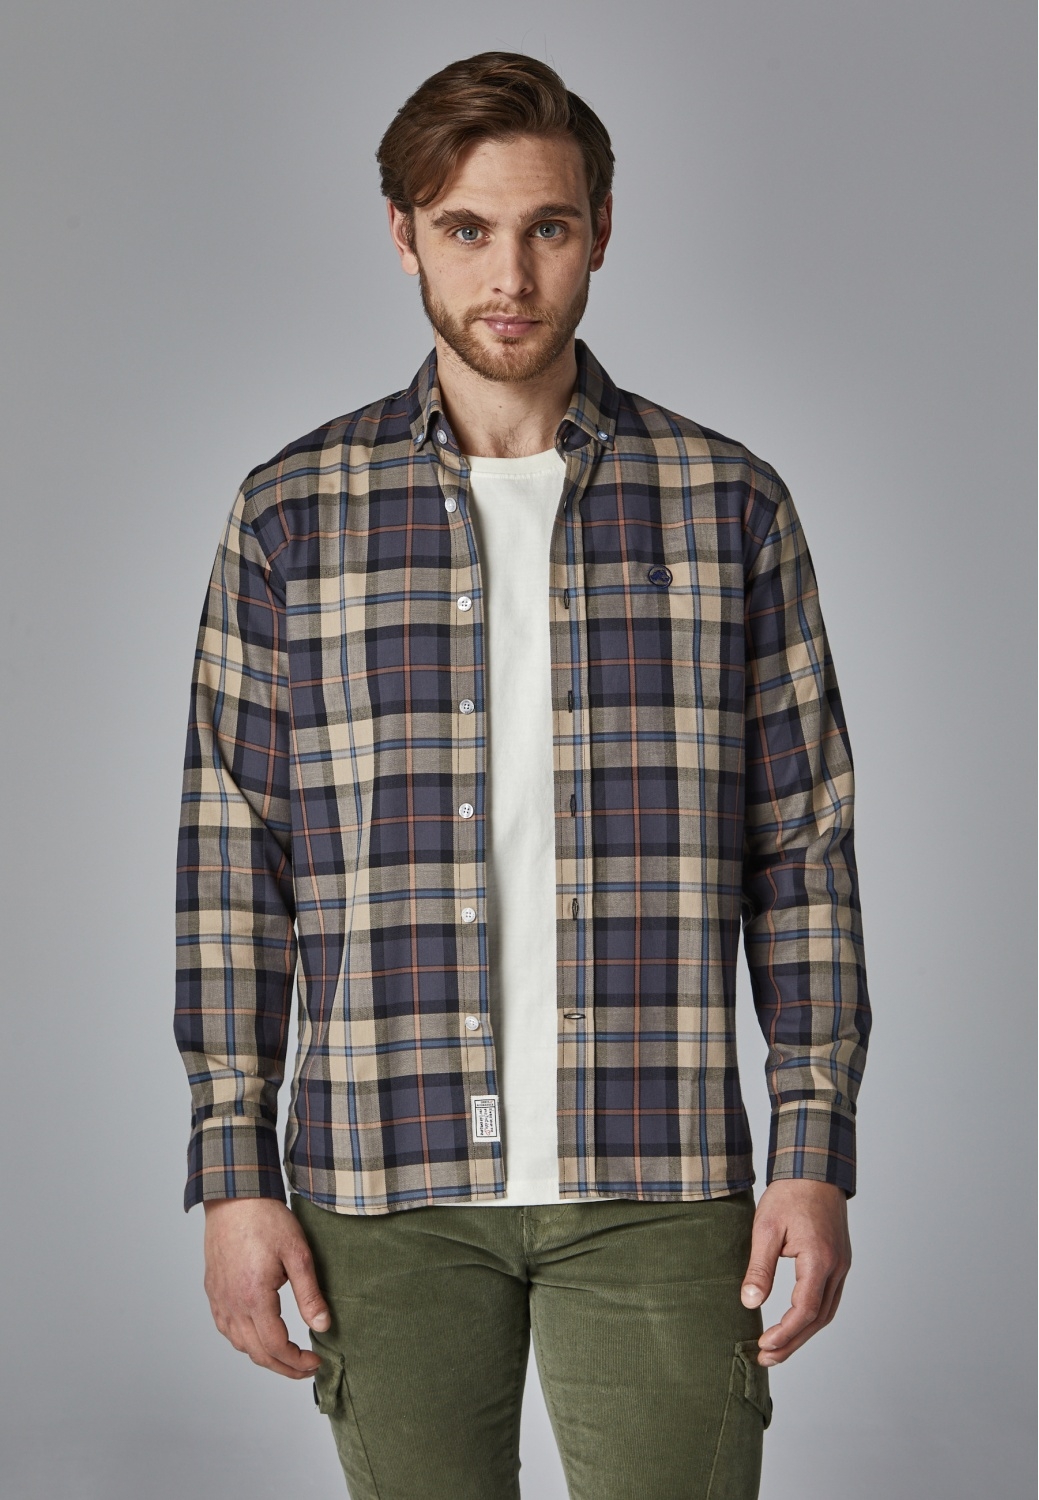 PLAID SHIRT IN BEIGE AND NAVY